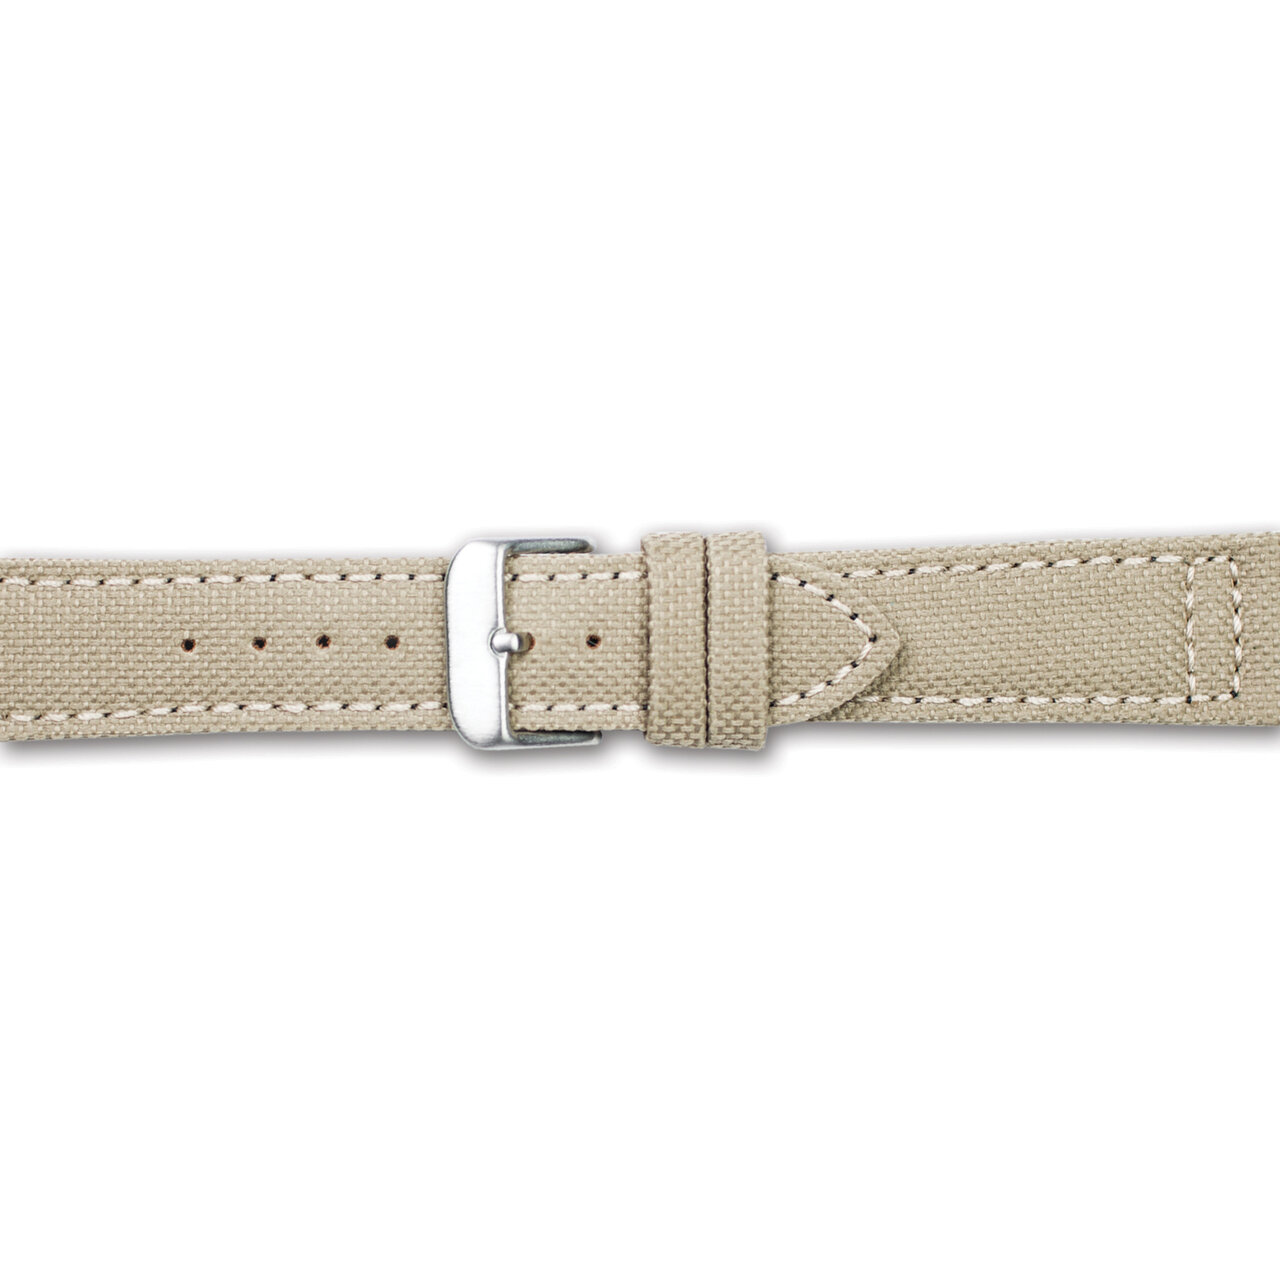 20mm Tan Canvas Leather Lining Silver-tone Buckle Watch Band BAW388-20